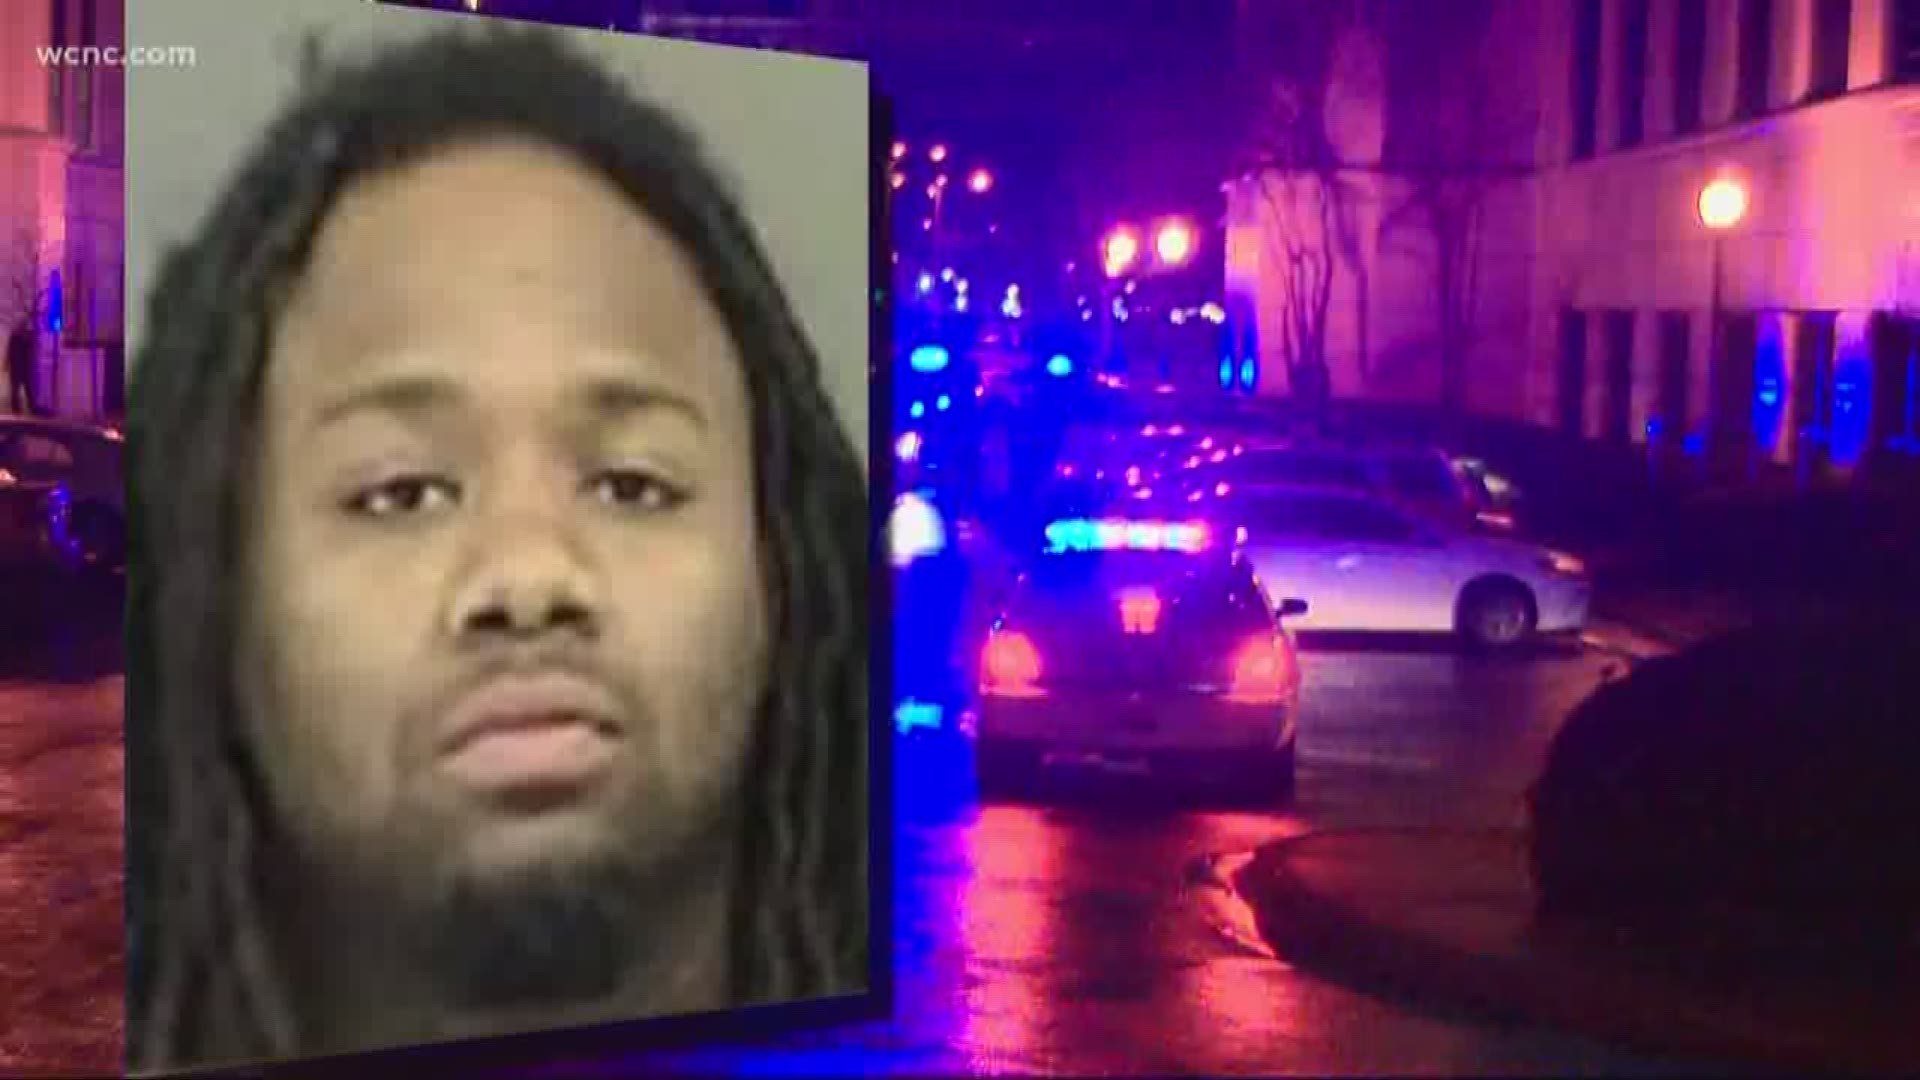 Charlotte Mecklenburg Police said the suspect in a west Charlotte homicide is dead after ambushing several officers outside headquarters Thursday night.